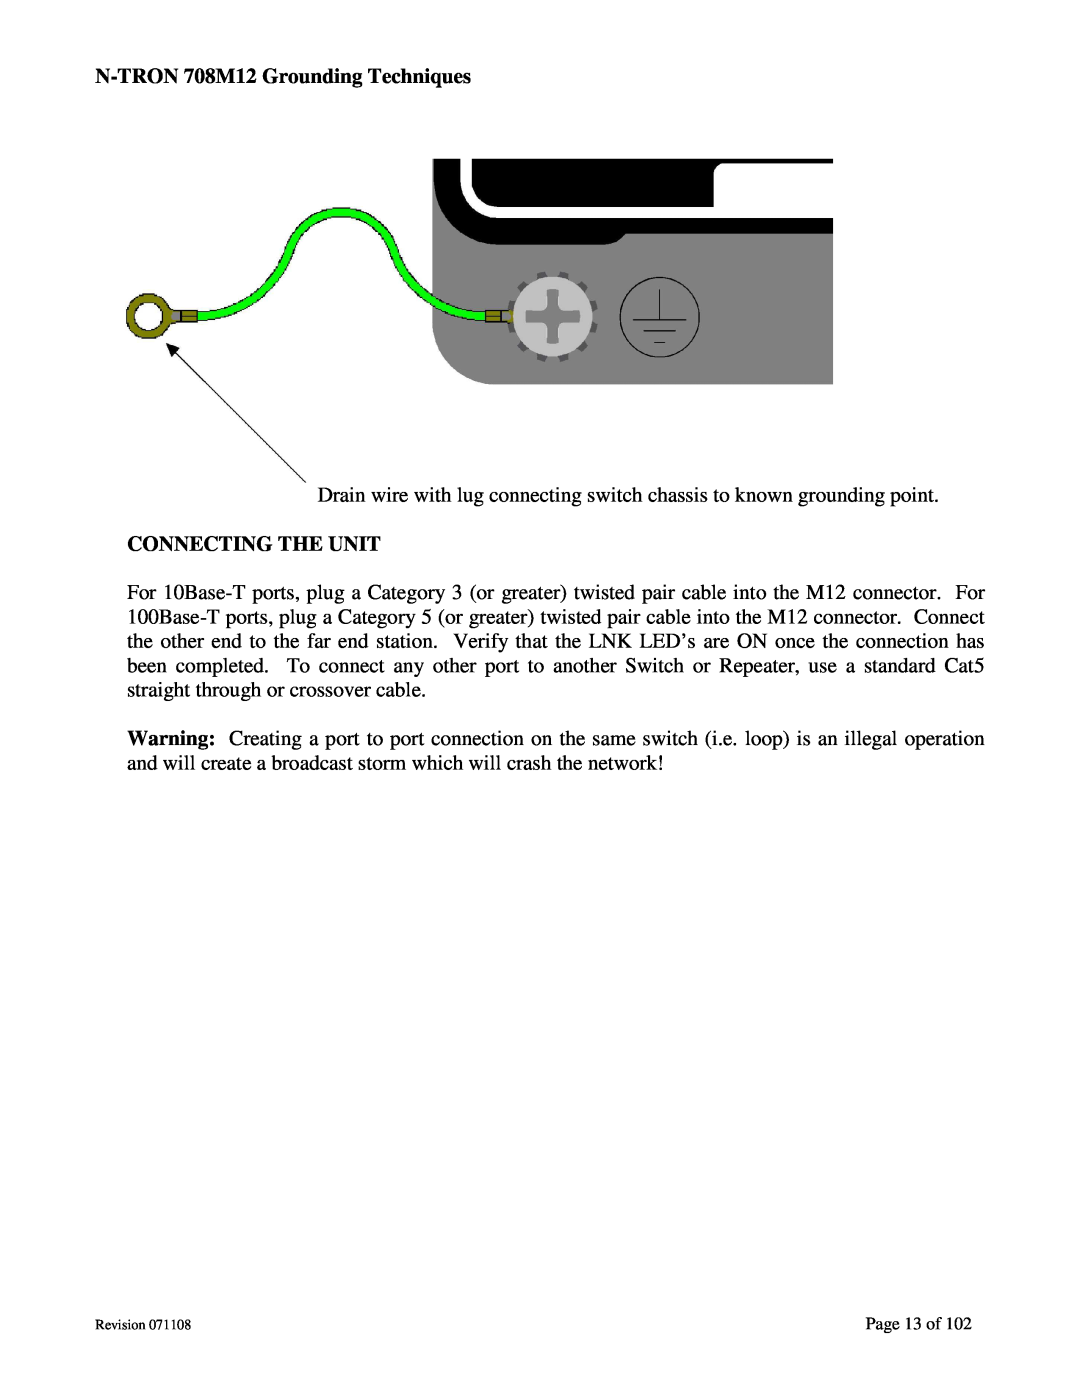 N-Tron user manual N-TRON 708M12 Grounding Techniques, Connecting The Unit, Page 13 of 